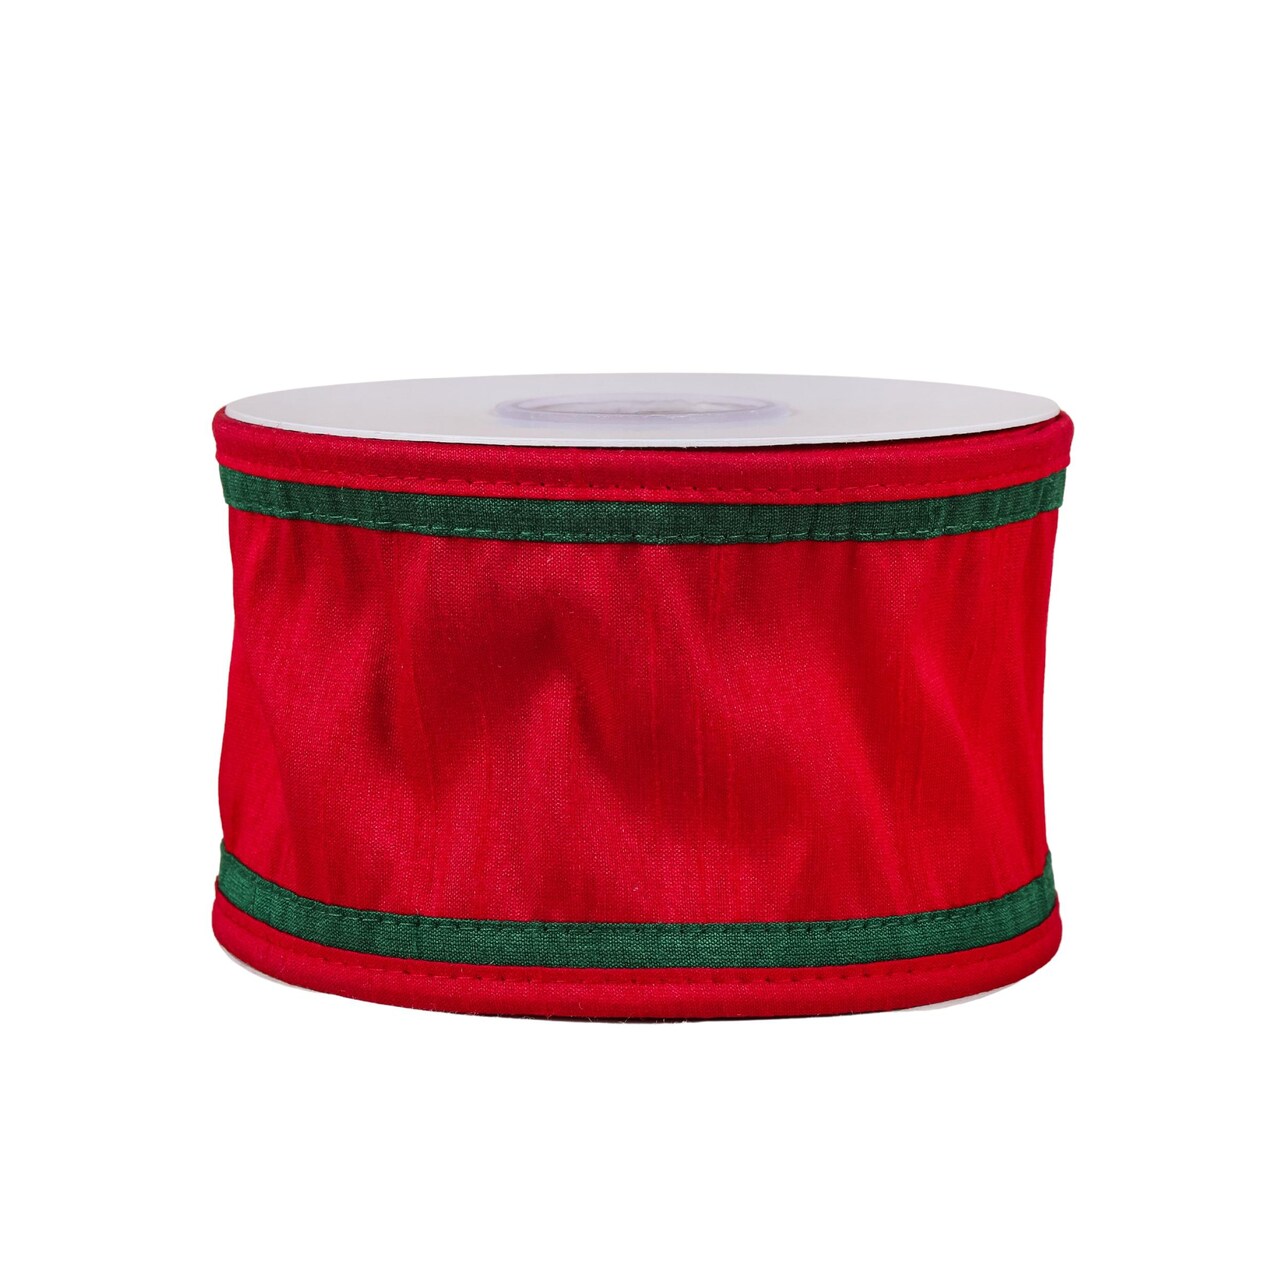 HGTV Home Collection Dupion Double Side Piping Ribbon , Red Green, 3 in